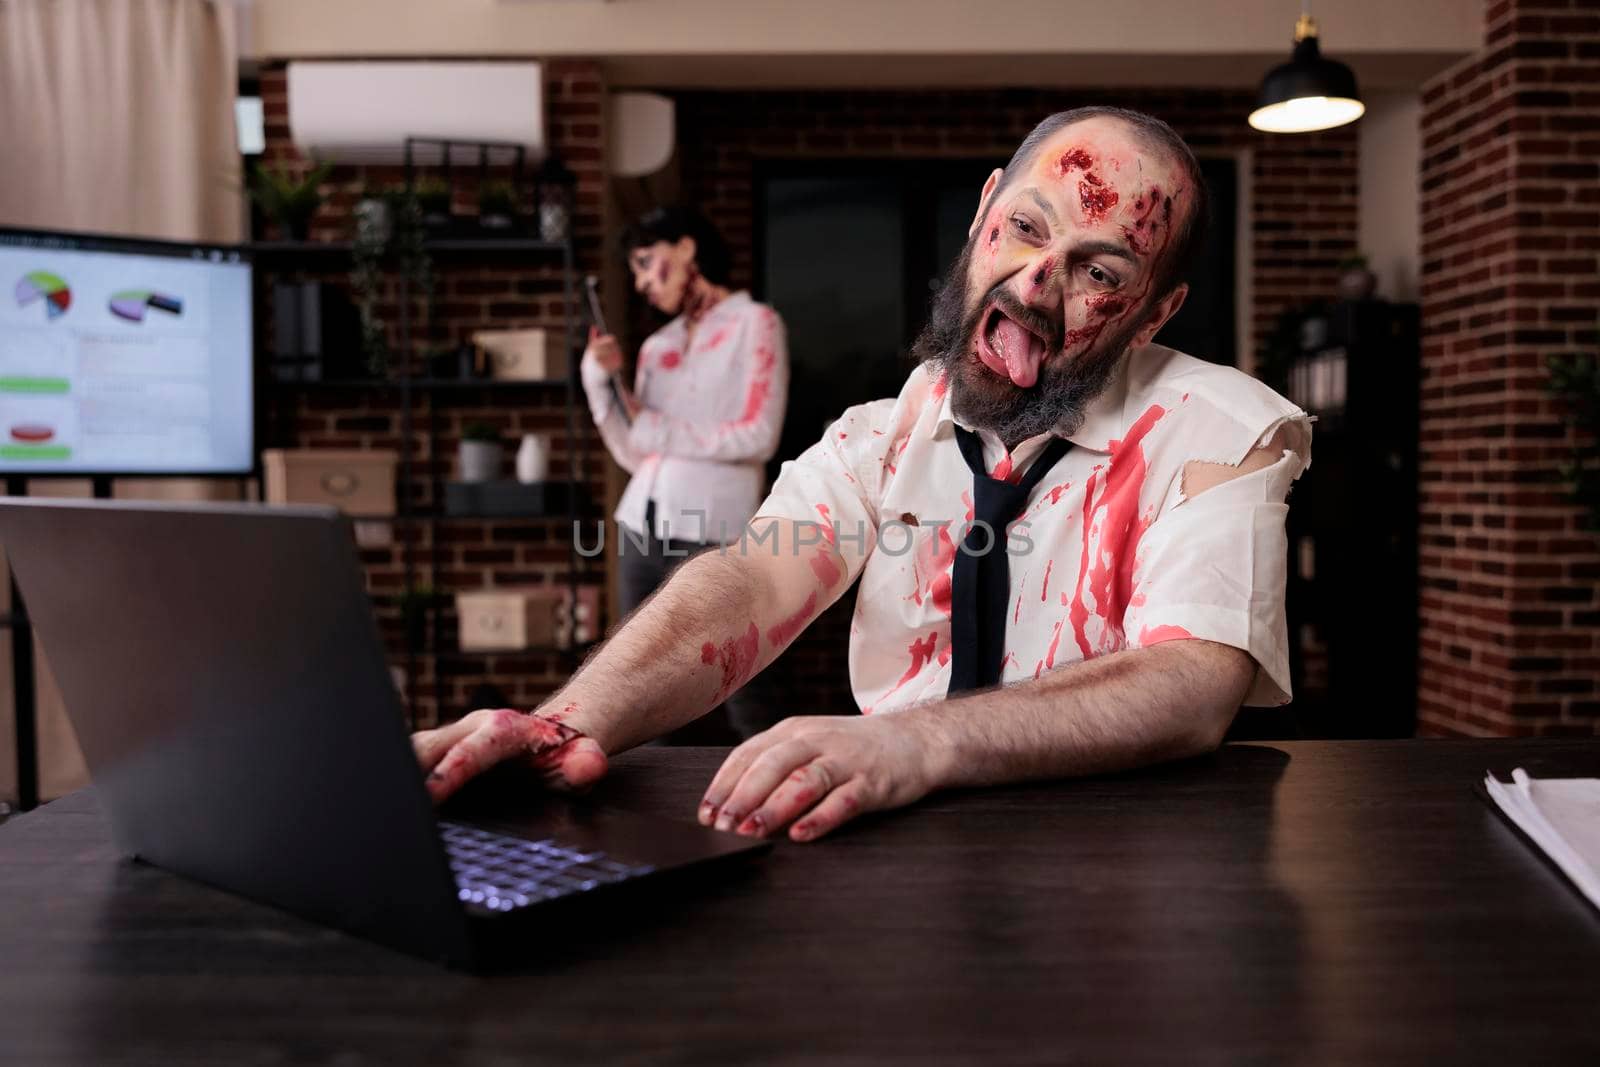 Creepy scary zombie using laptop at desk, looking creepy and horrific working on computer. Terrifying eerie dramatic brain eating monsters sitting in business office, horrible gory walker.